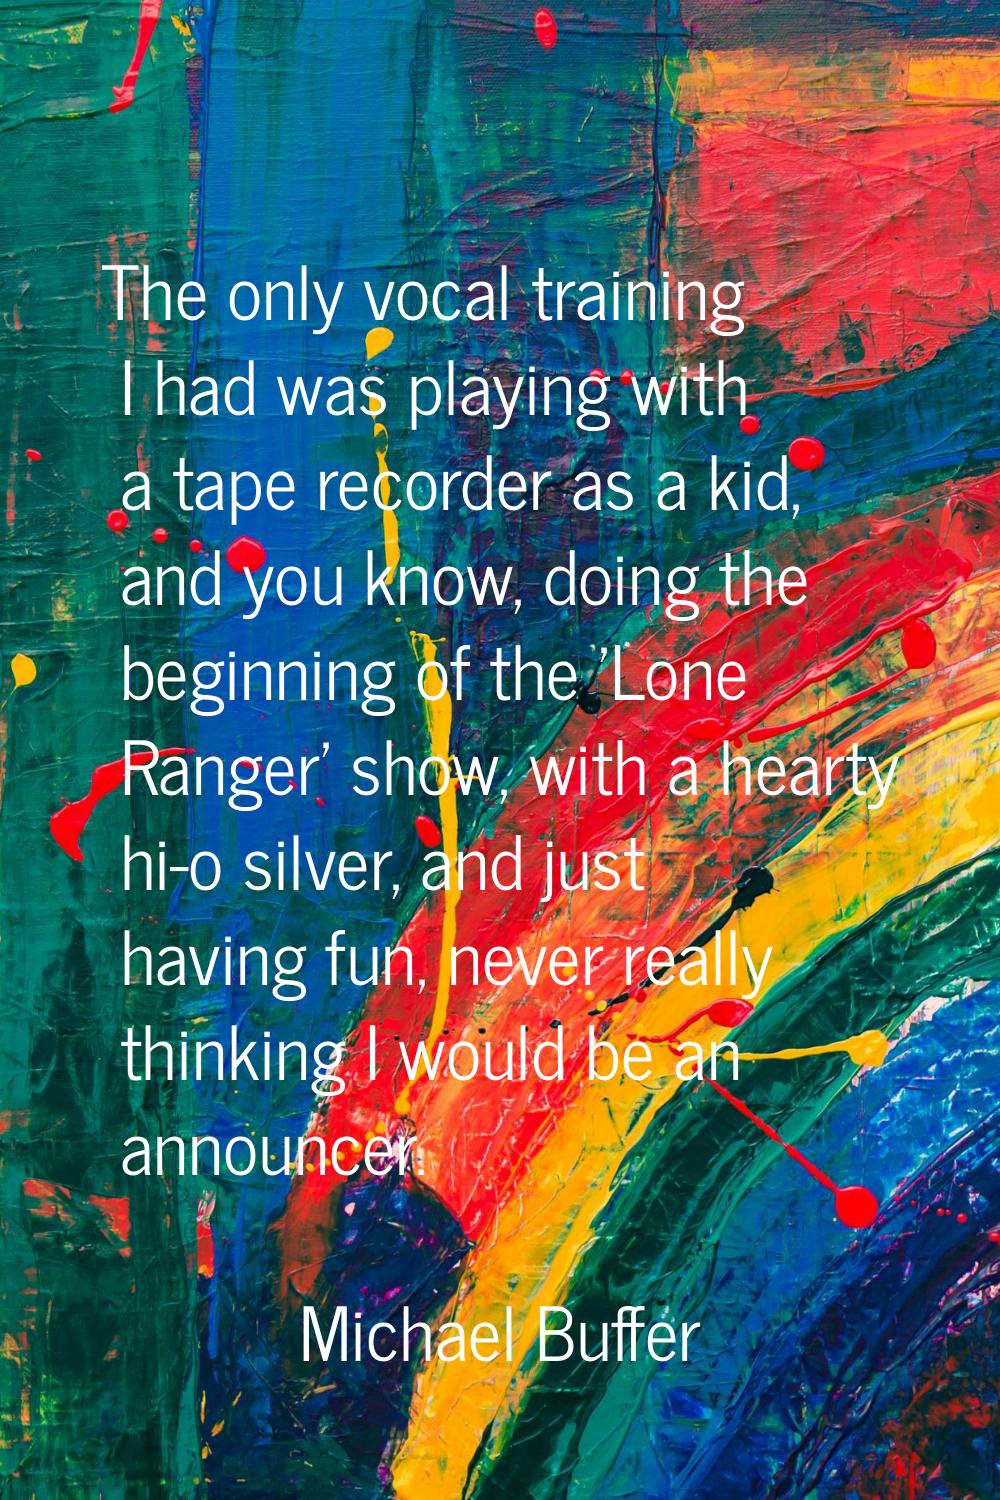 The only vocal training I had was playing with a tape recorder as a kid, and you know, doing the be